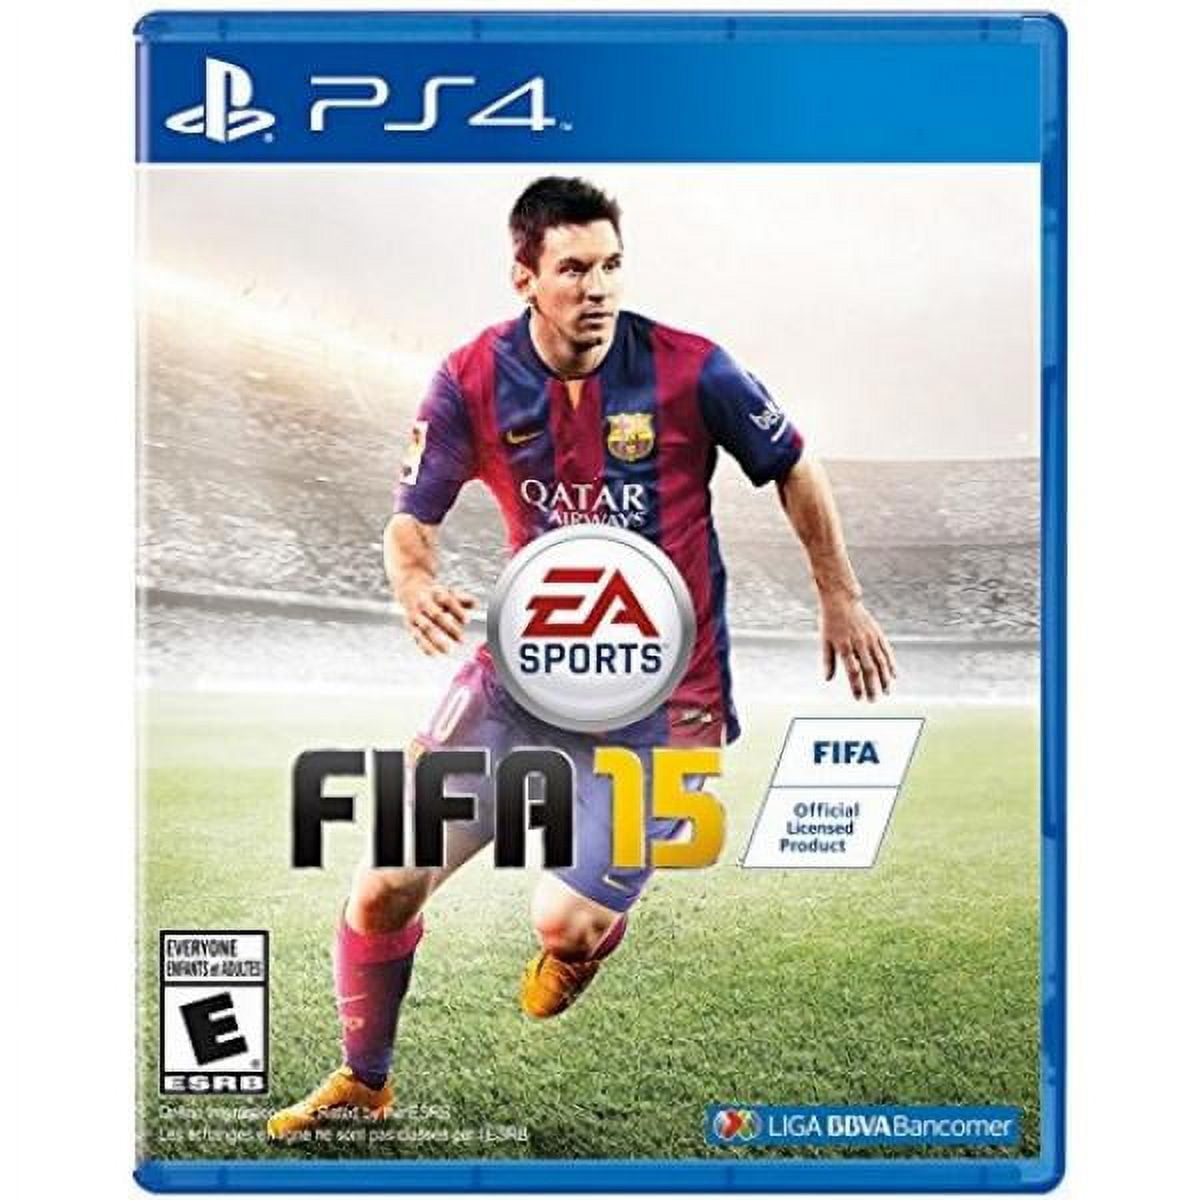 Grand Theft Auto 5 + FIFA 15 + Need For Speed Rivals - PlayStation